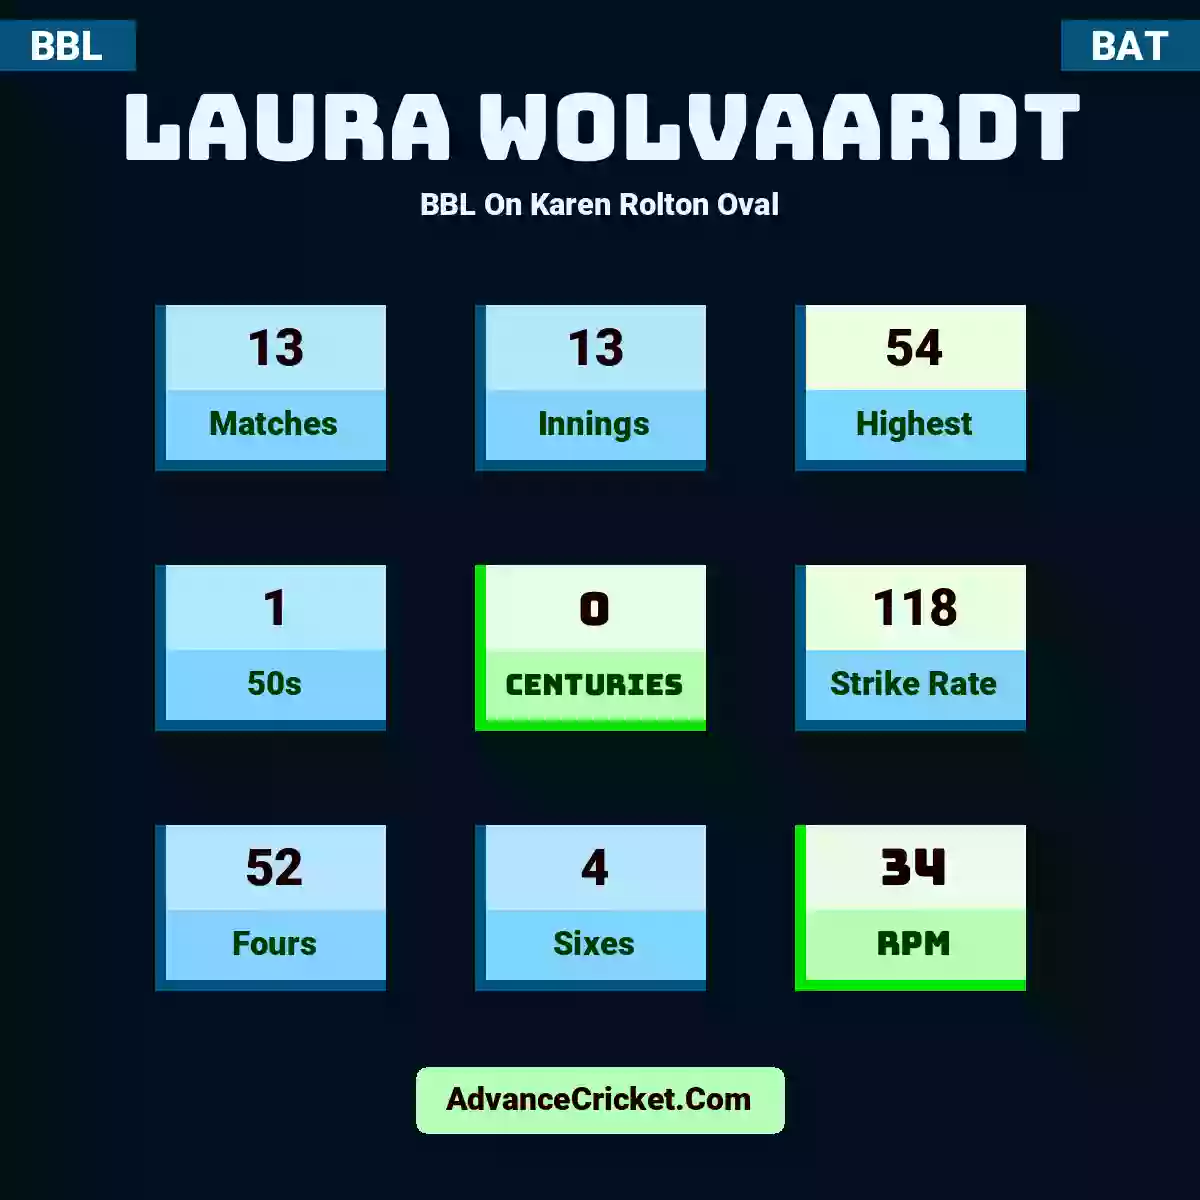 Laura Wolvaardt BBL  On Karen Rolton Oval, Laura Wolvaardt played 13 matches, scored 54 runs as highest, 1 half-centuries, and 0 centuries, with a strike rate of 118. L.Wolvaardt hit 52 fours and 4 sixes, with an RPM of 34.